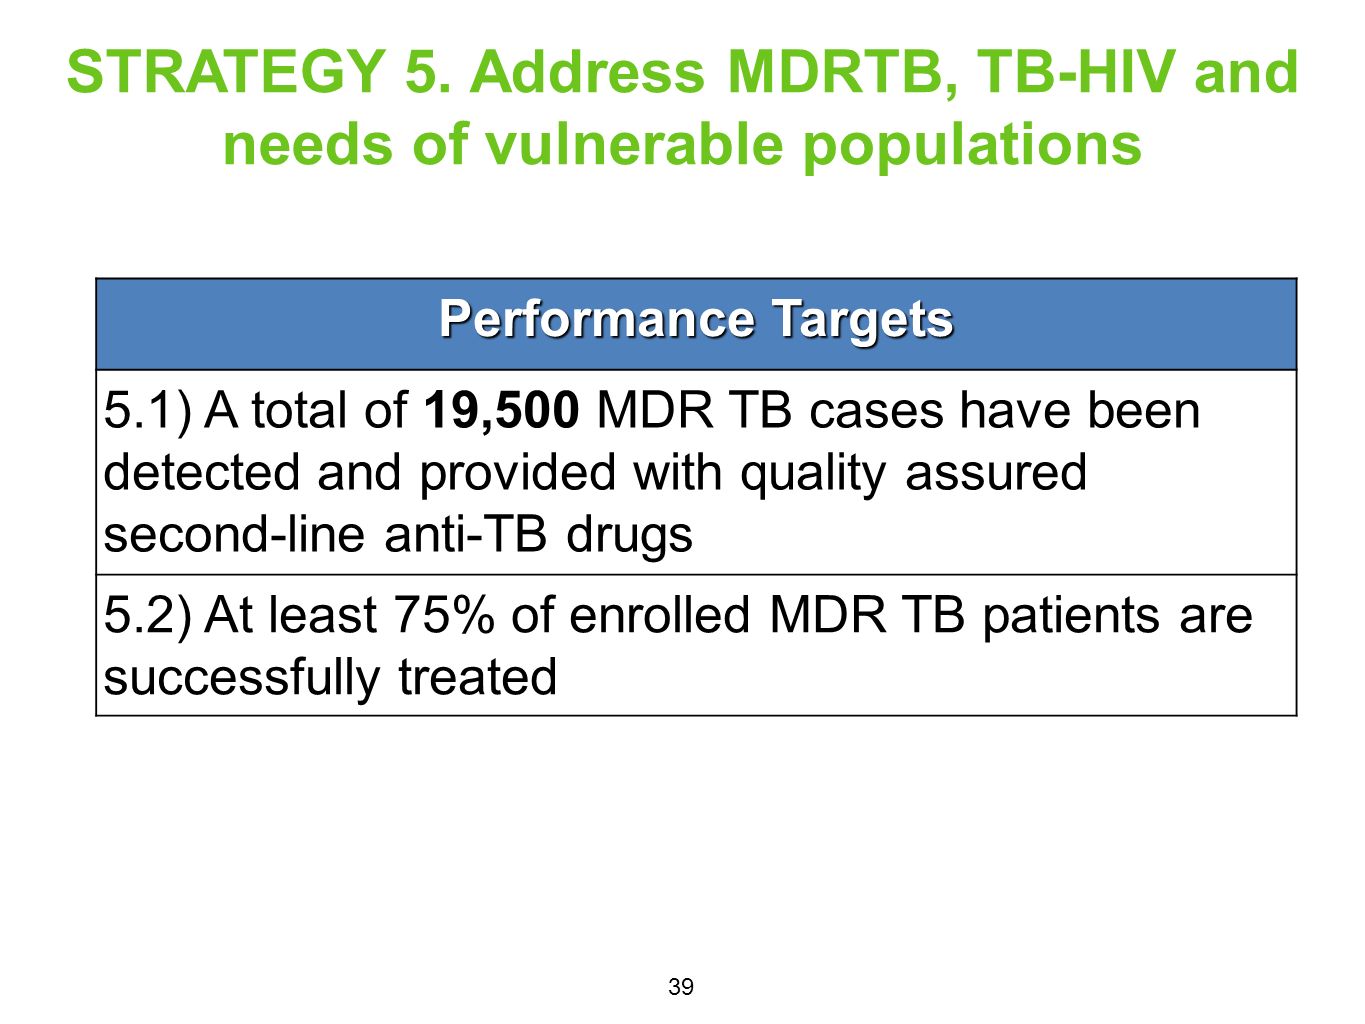 STRATEGY 5. Address MDRTB, TB-HIV and needs of vulnerable populations